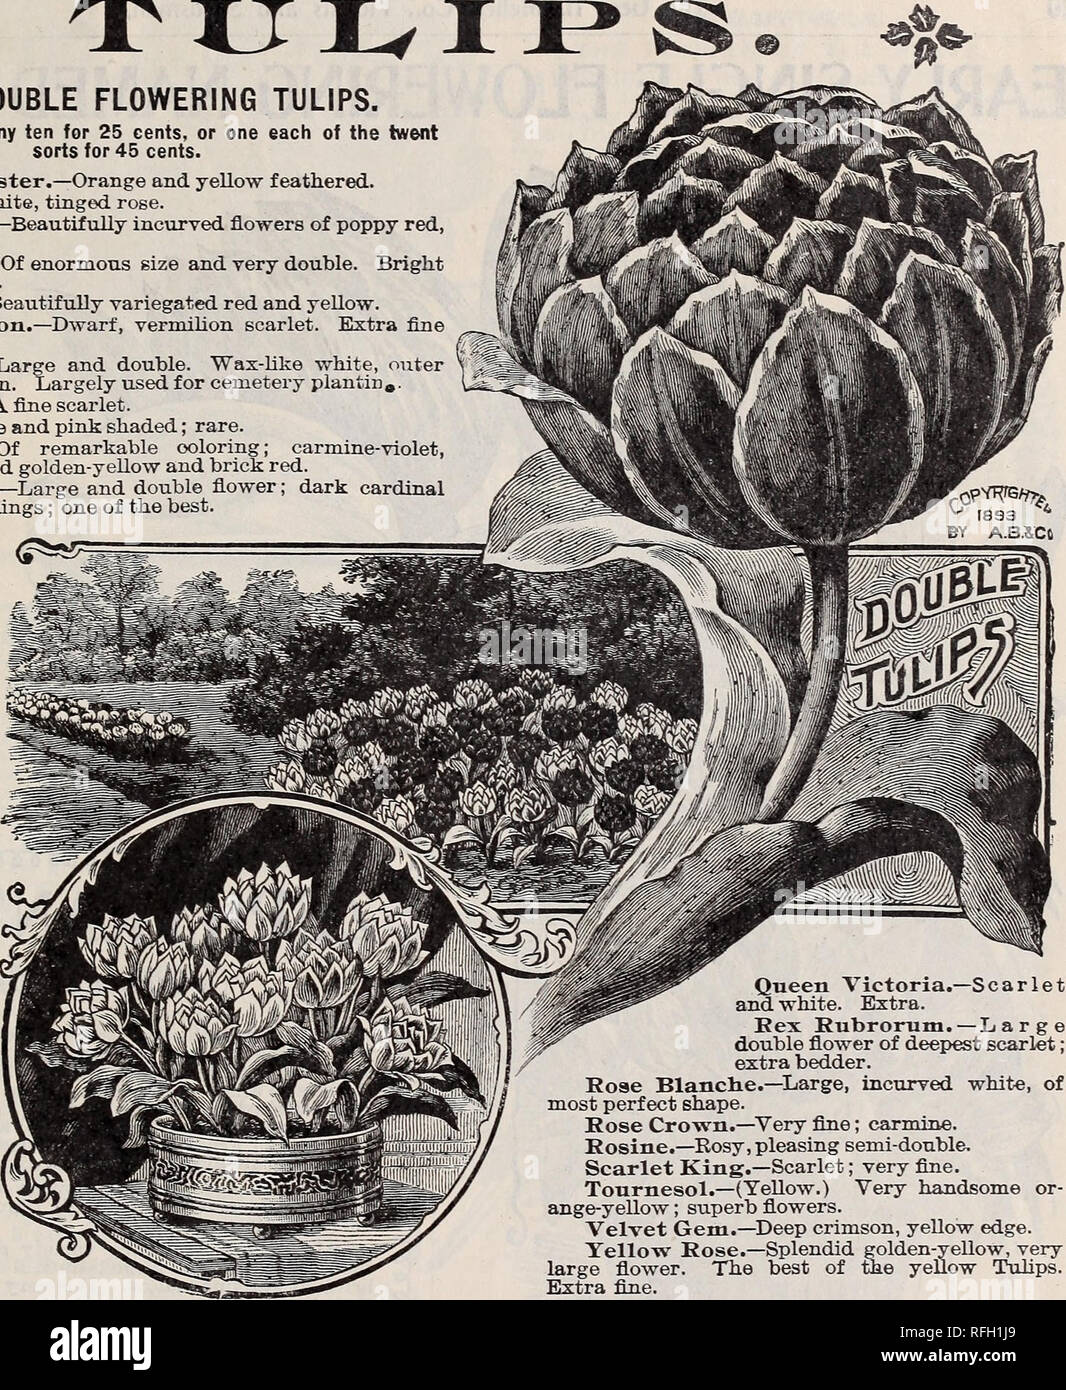 . Illustrated catalogue bulbs, roses, plants : for winter and spring blooming. Nursery stock Ohio Springfield Catalogs; Bulbs (Plants) Catalogs; Flowers Seeds Catalogs; Plants, Ornamental Catalogs; Fruit Catalogs. Irniisfallen Greenhouses, Springfield, Ohio. 9 CHOICE DOUBLE FLOWERING TULIPS. Price, 3 cents each; any ten for 25 cents, or one each of the twent sorts for 45 cents. Count of Leicester.—Orange and yellow feathered. Le Blason.—White, tinged rose. Duke of York.—Beautifully incurved flowers of poppy red, broadly edged white. Gloria Solus.—Of enormous size and very double. Bright scarle Stock Photo